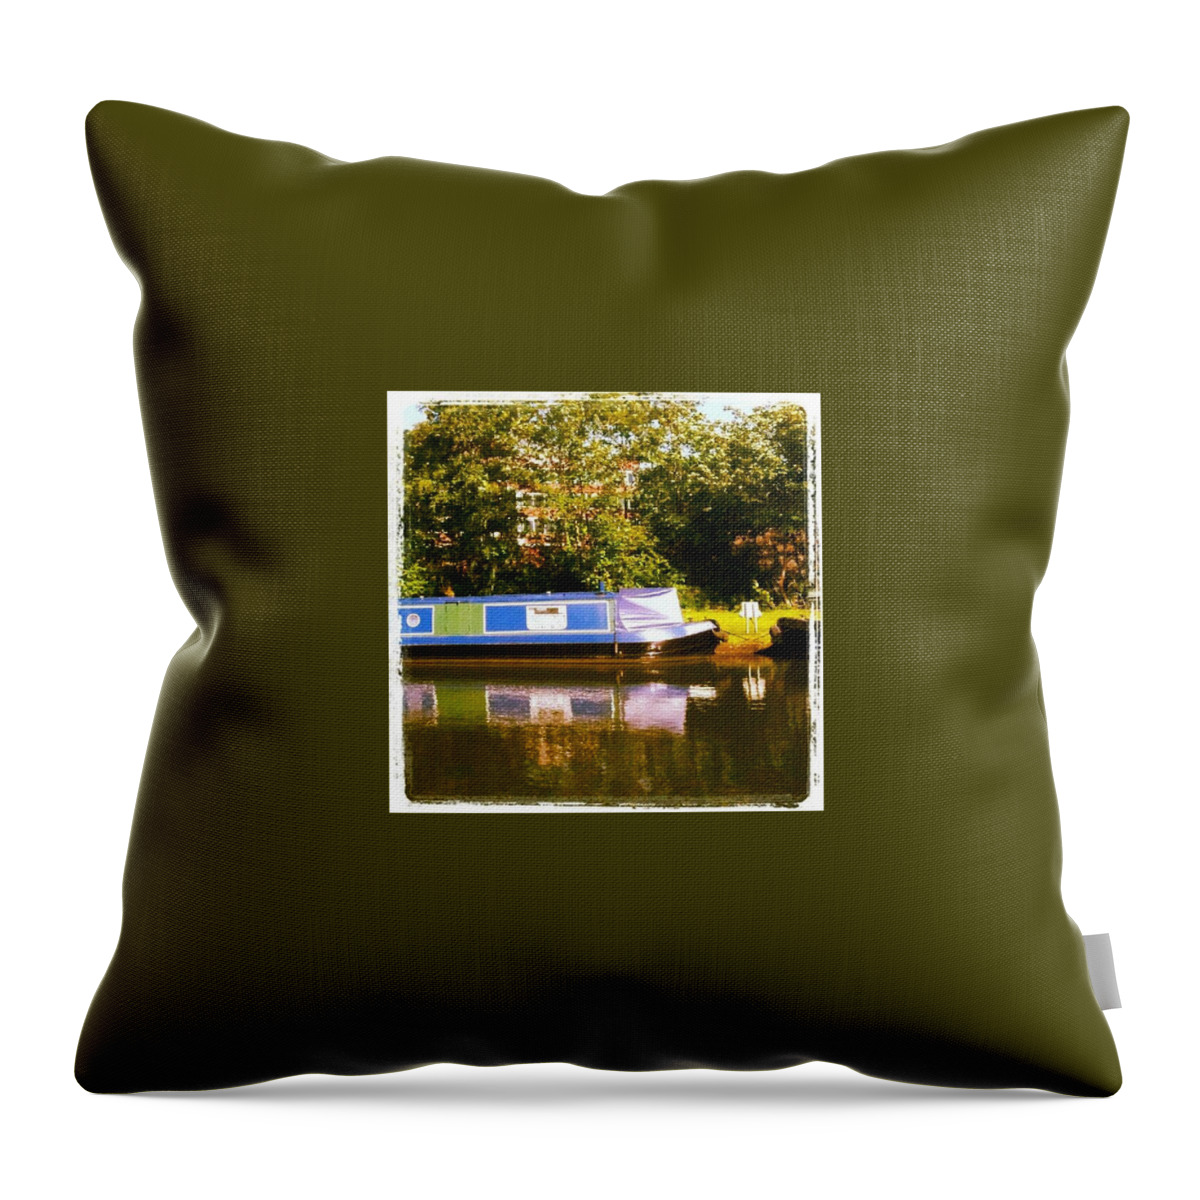 Summer Throw Pillow featuring the photograph Narrowboat In Blue by Abbie Shores